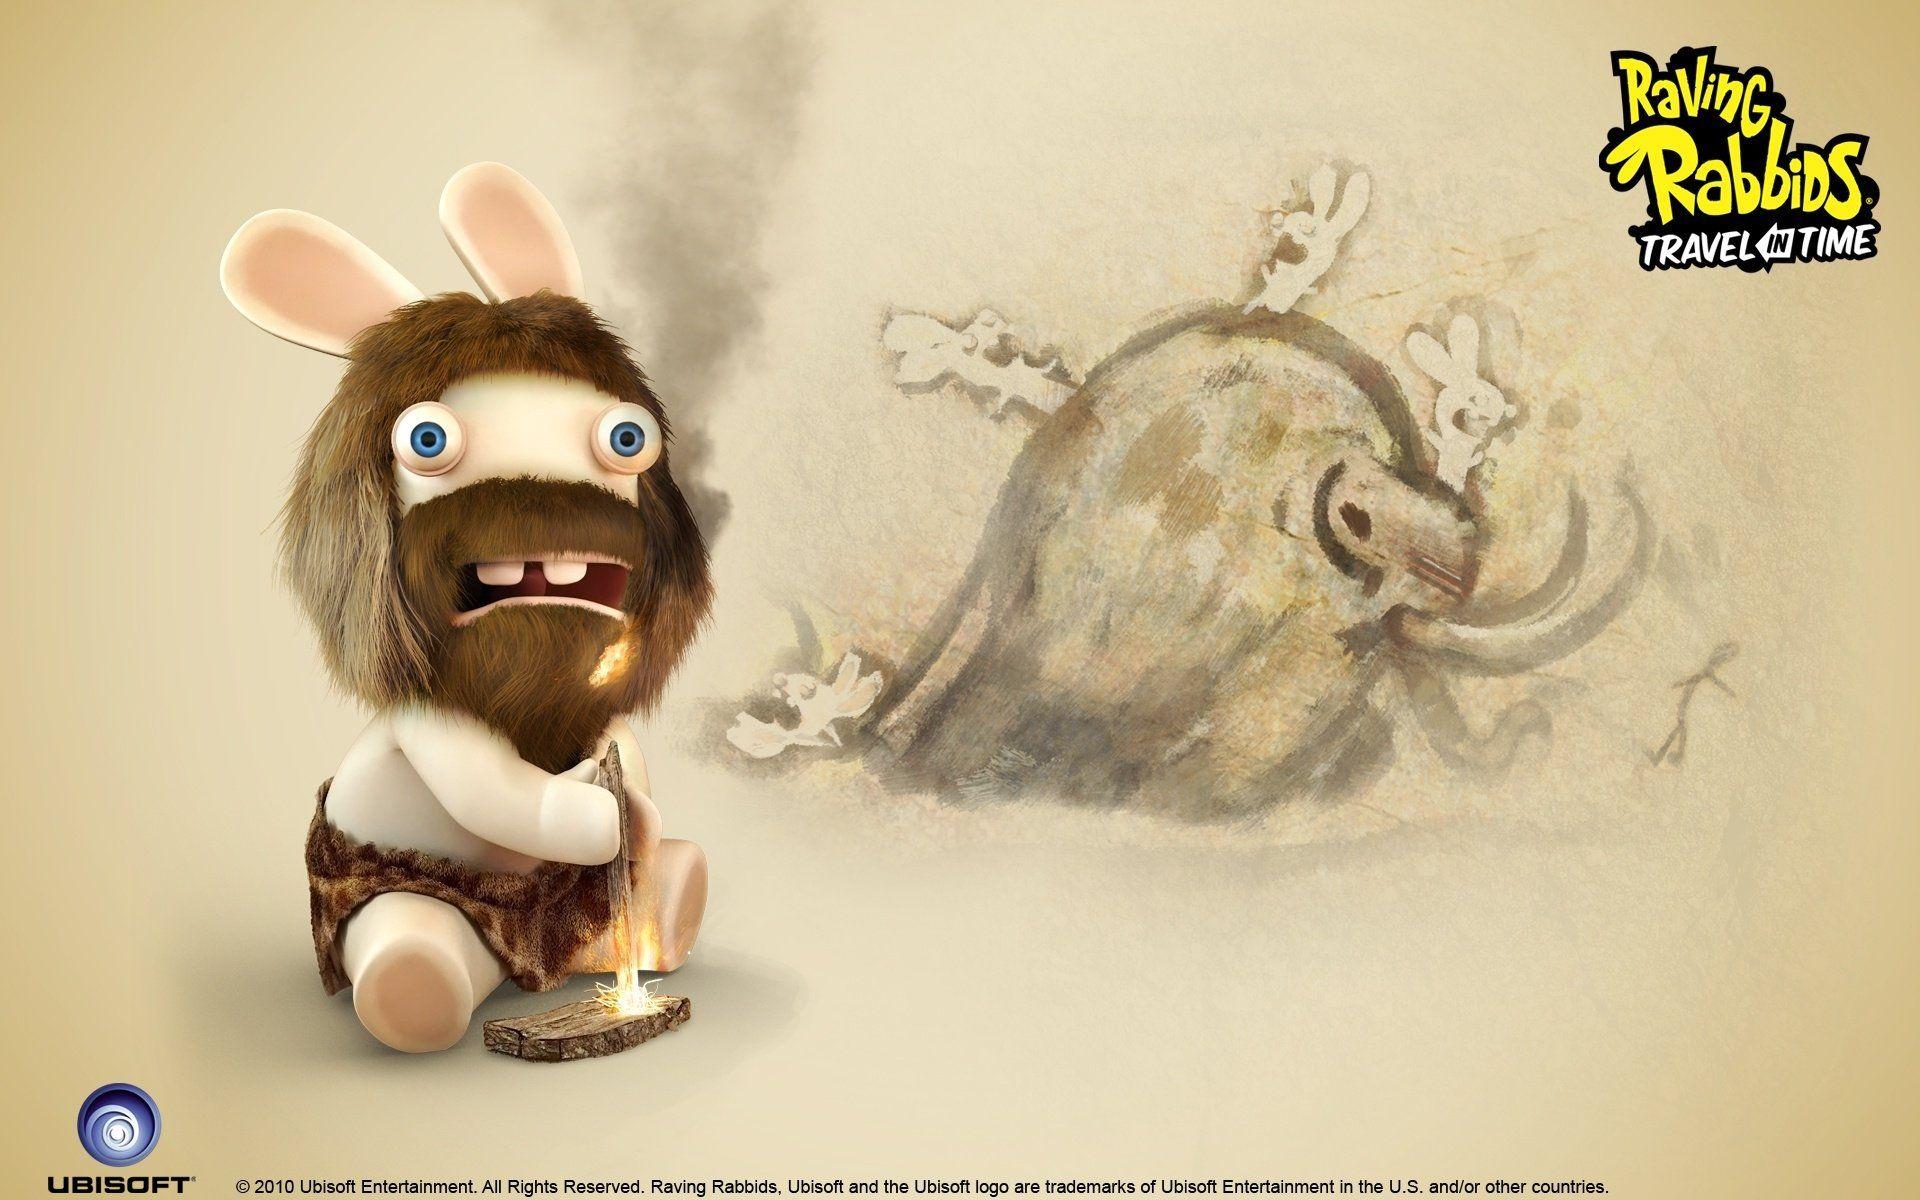 Raving Rabbids: Travel In Time HD Wallpaper. Background